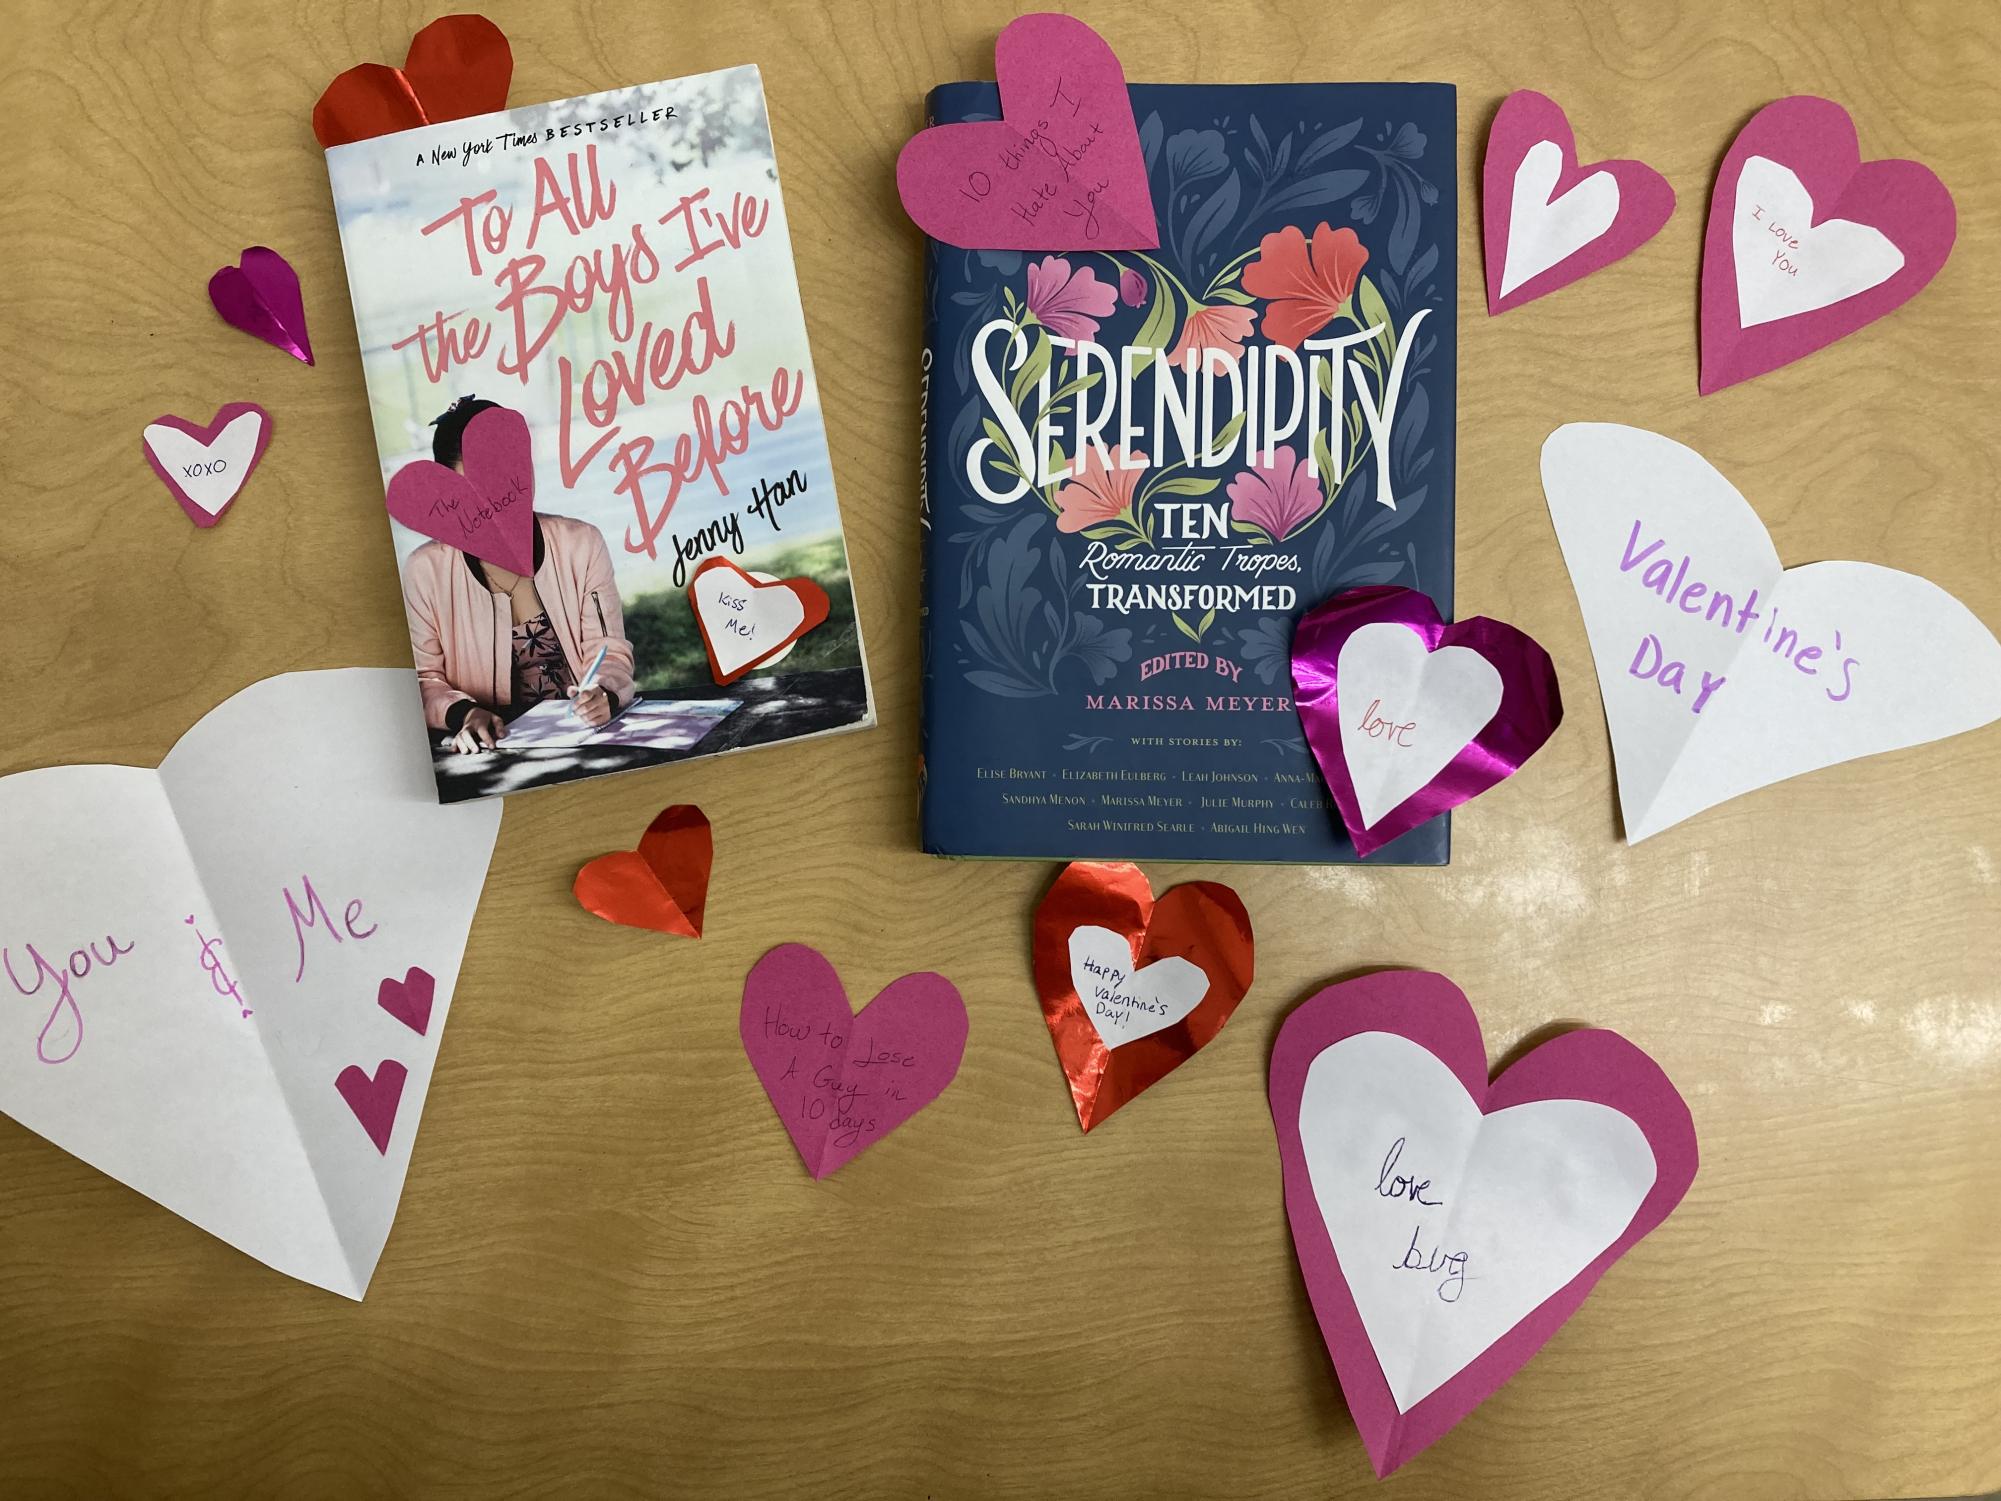 FALLING FOR YOU: To All the Boys Ive Loved Before and Serendipity sit side-by-side amongst heart-shaped Valentines. A couple of the hearts feature the names of movies listed in the article. 